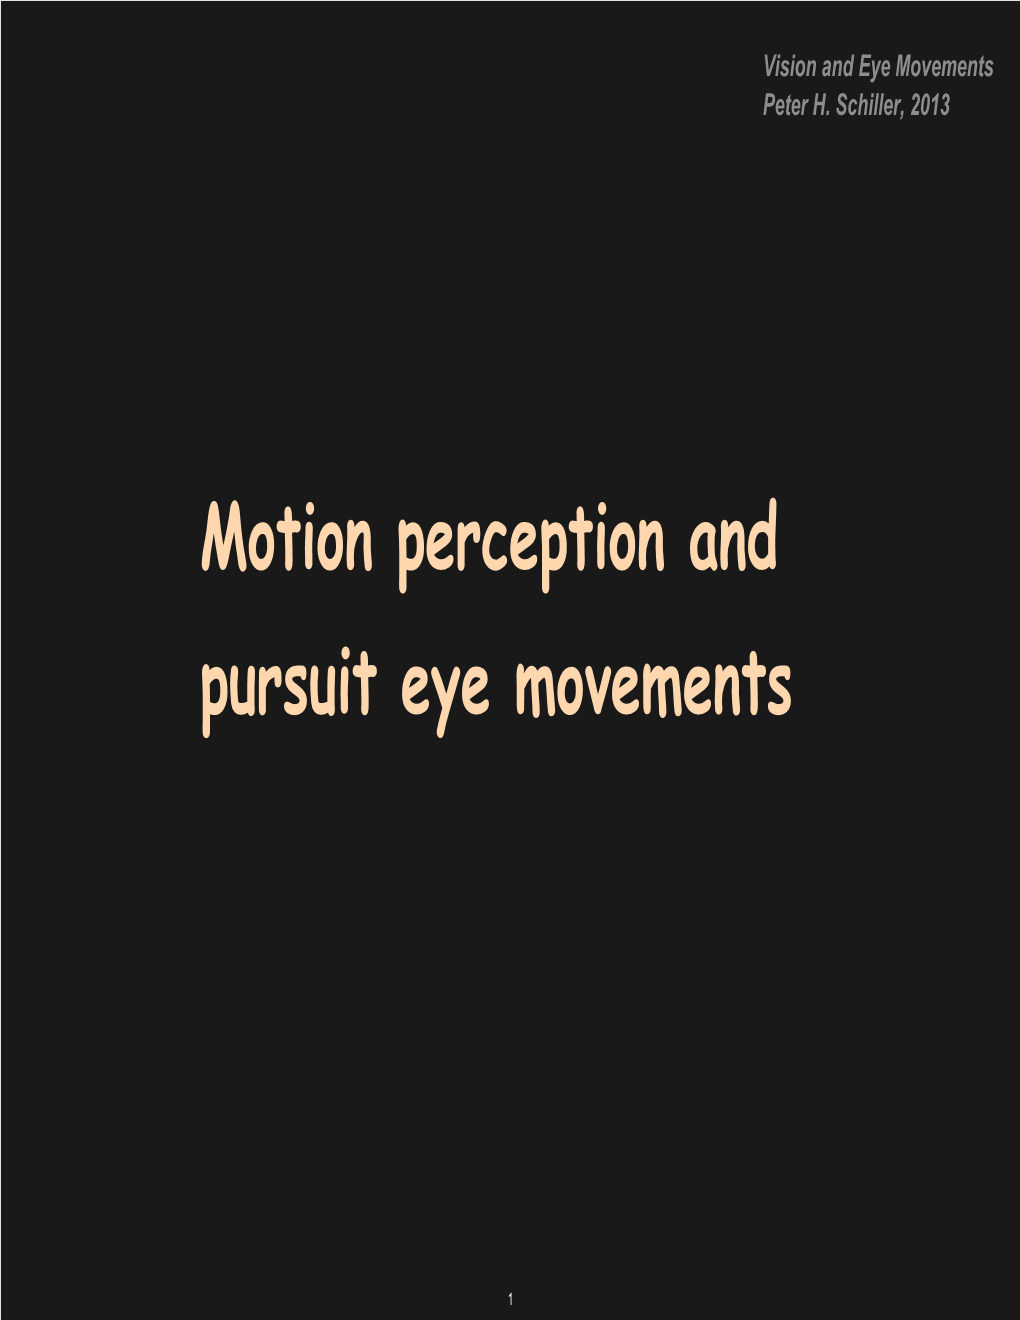 Motion Perception and Pursuit Eye Movements